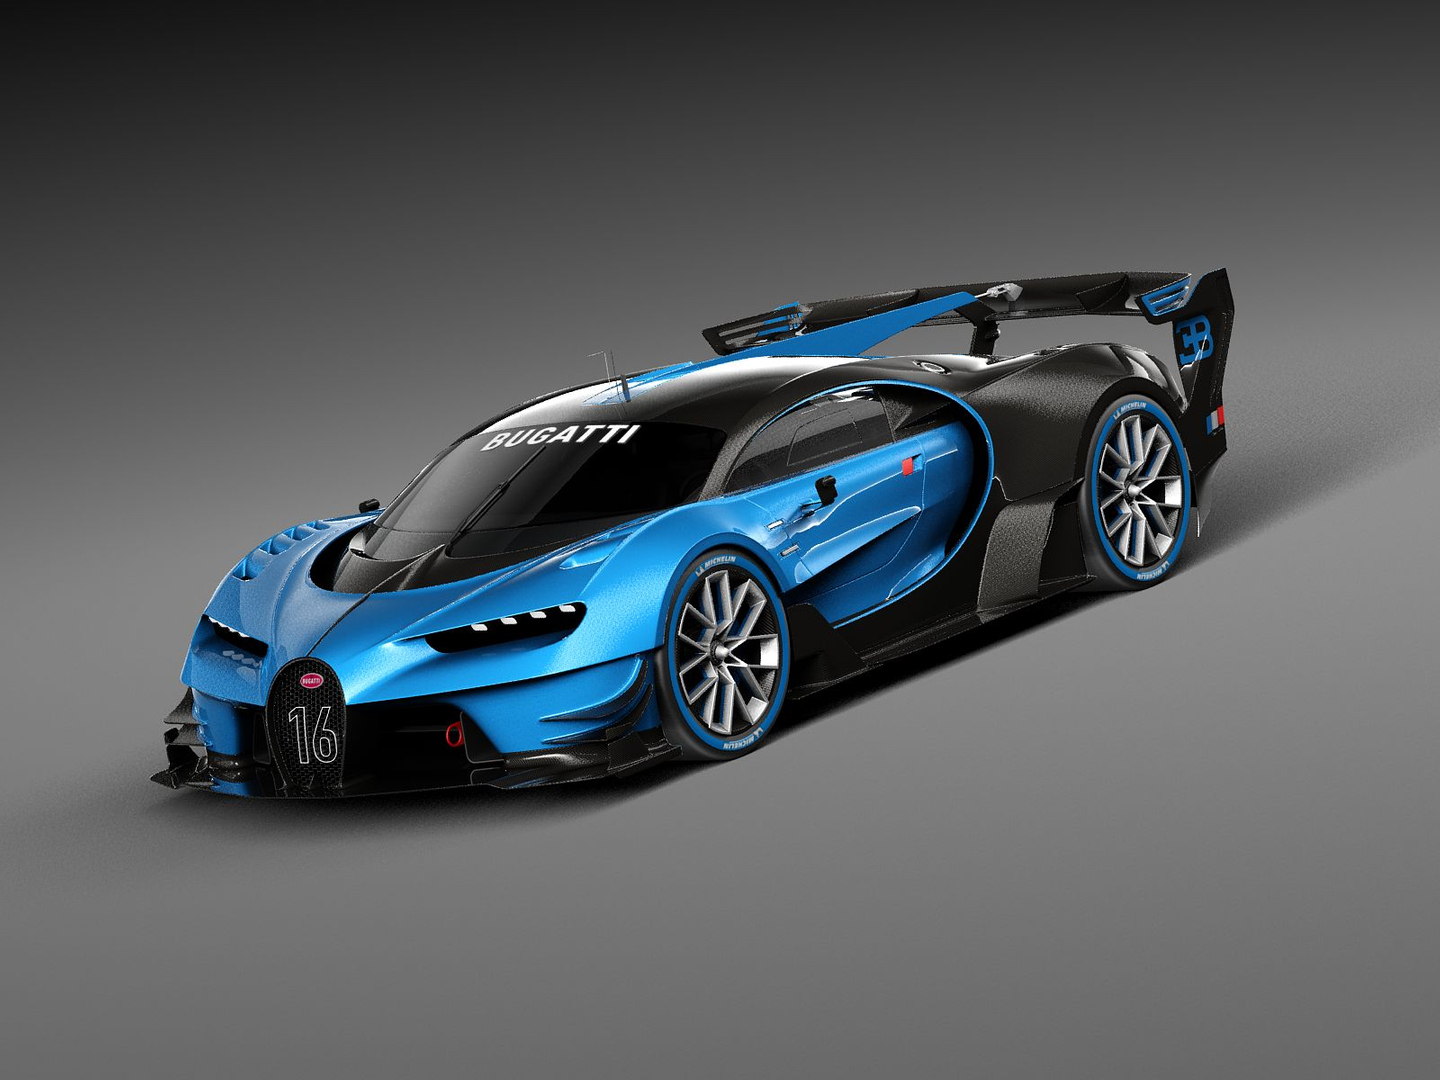 CAd drawings details of side and other elevation of Bugatti car - Cadbull